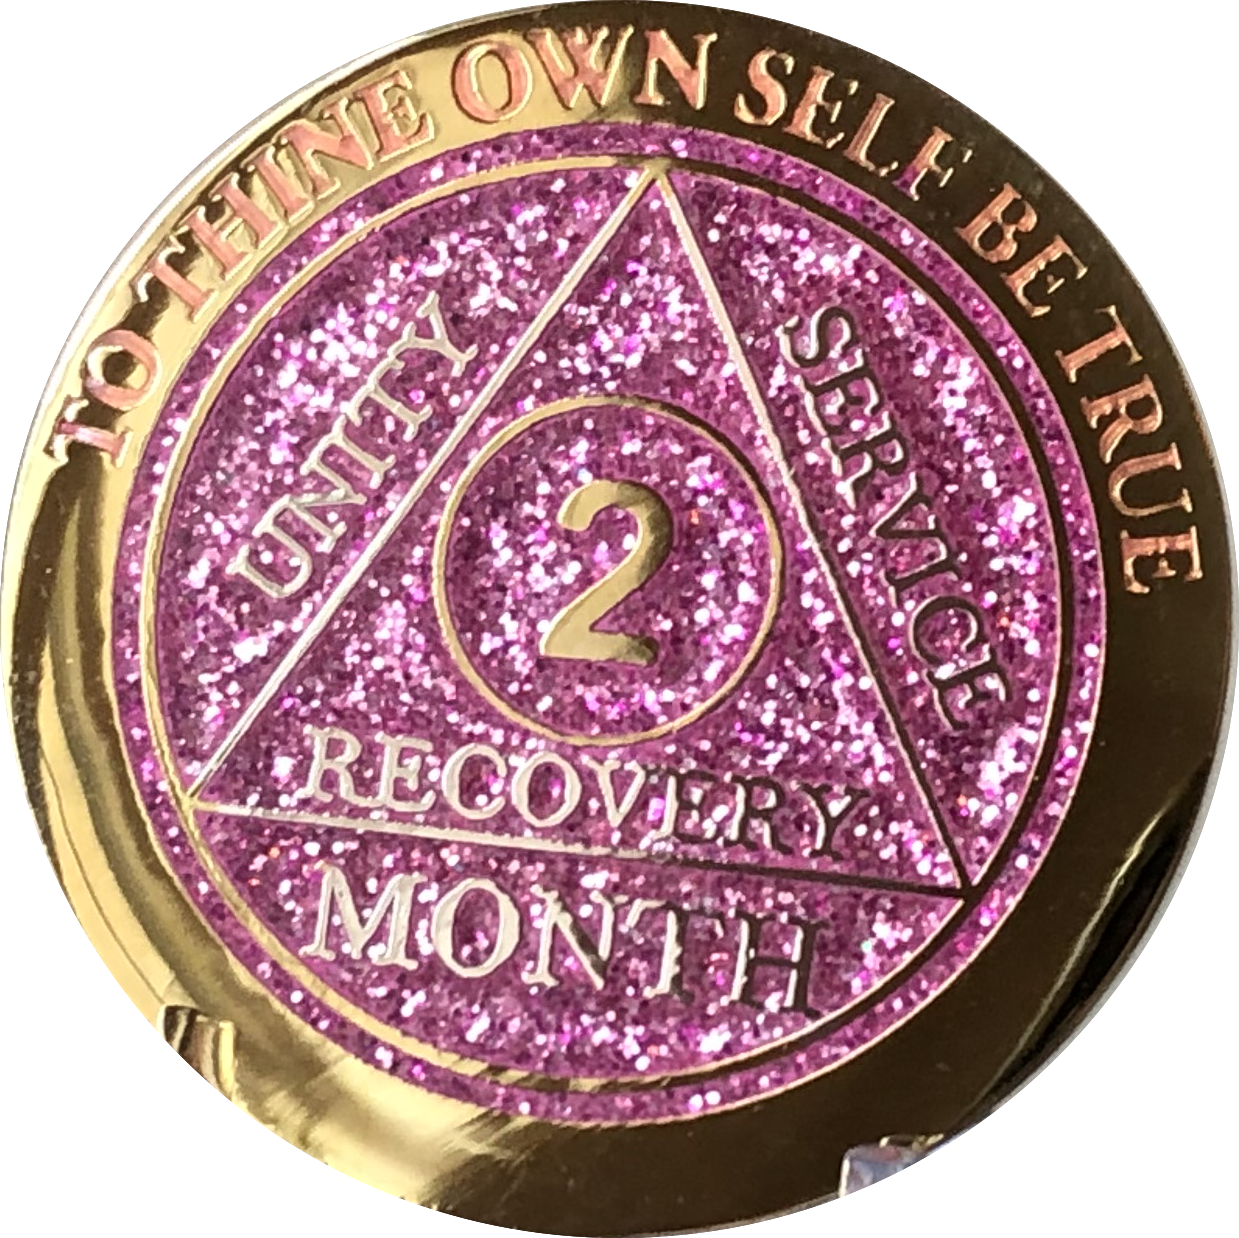 2 Month AA Medallion Reflex Pink Glitter Gold and Silver Plated Sobriety Chip